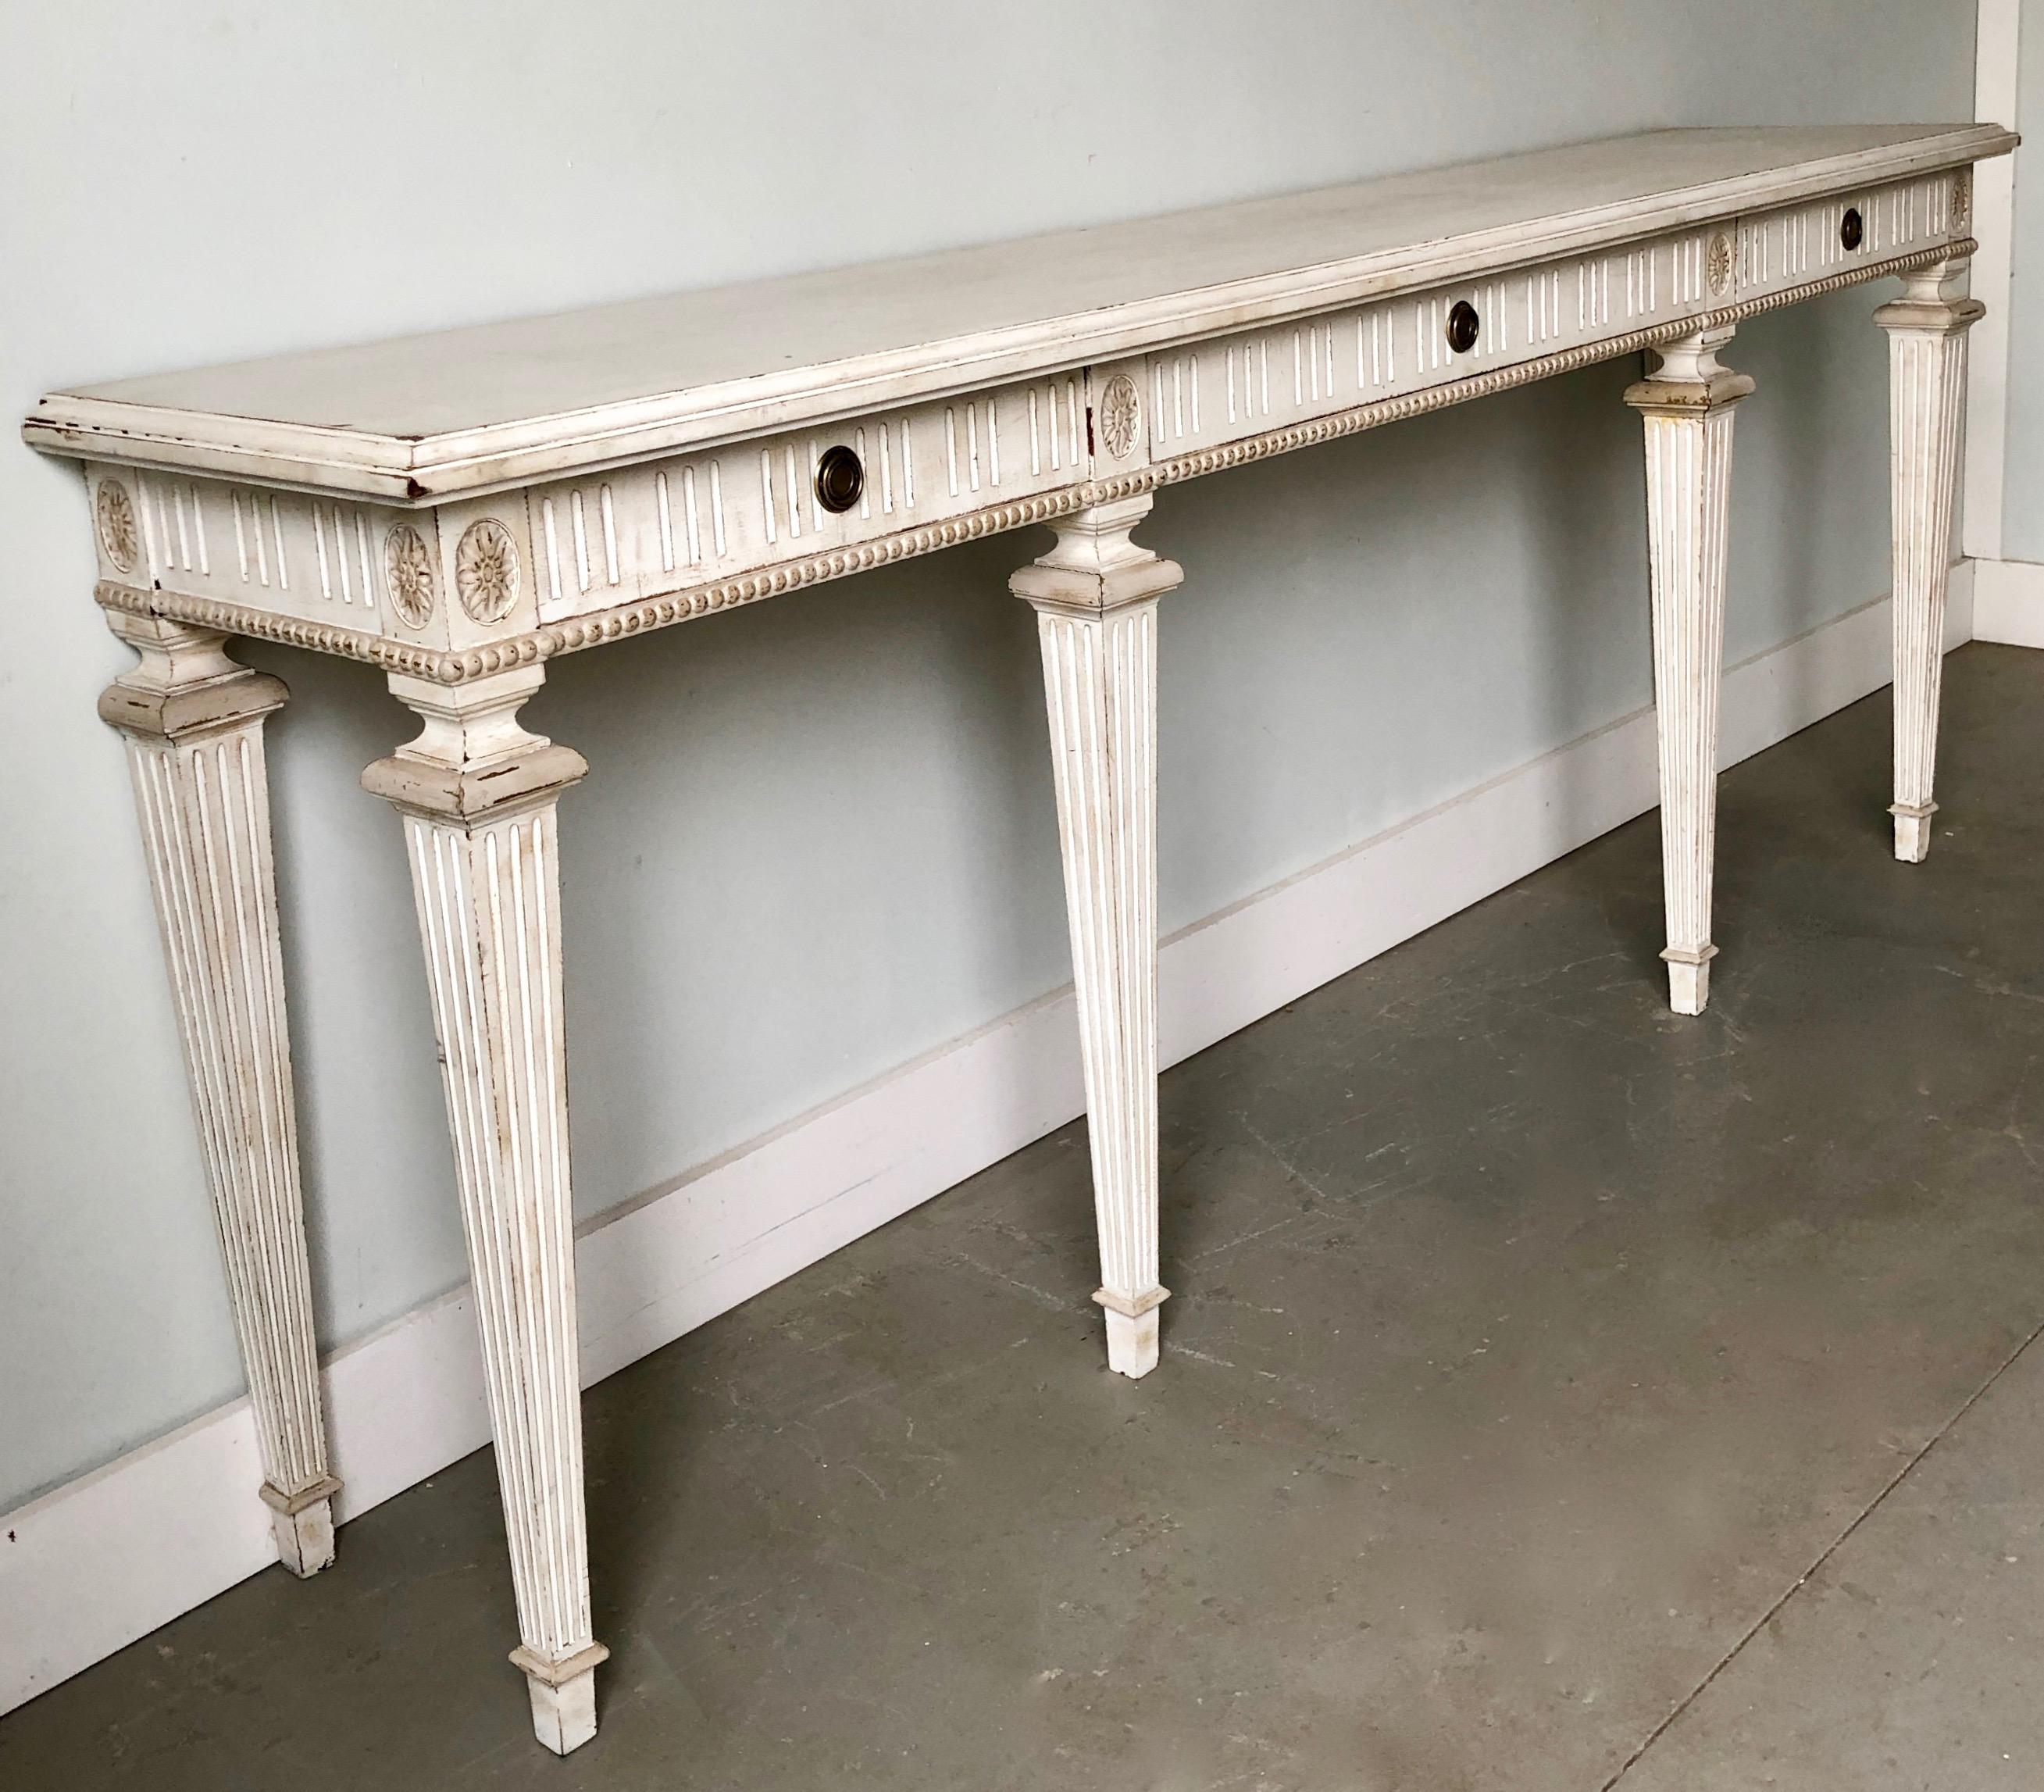 Vintage French Louis XVI style long painted console with freze decorated in Classic fluted motifs and floral medallions.
France, circa 1930-1940.